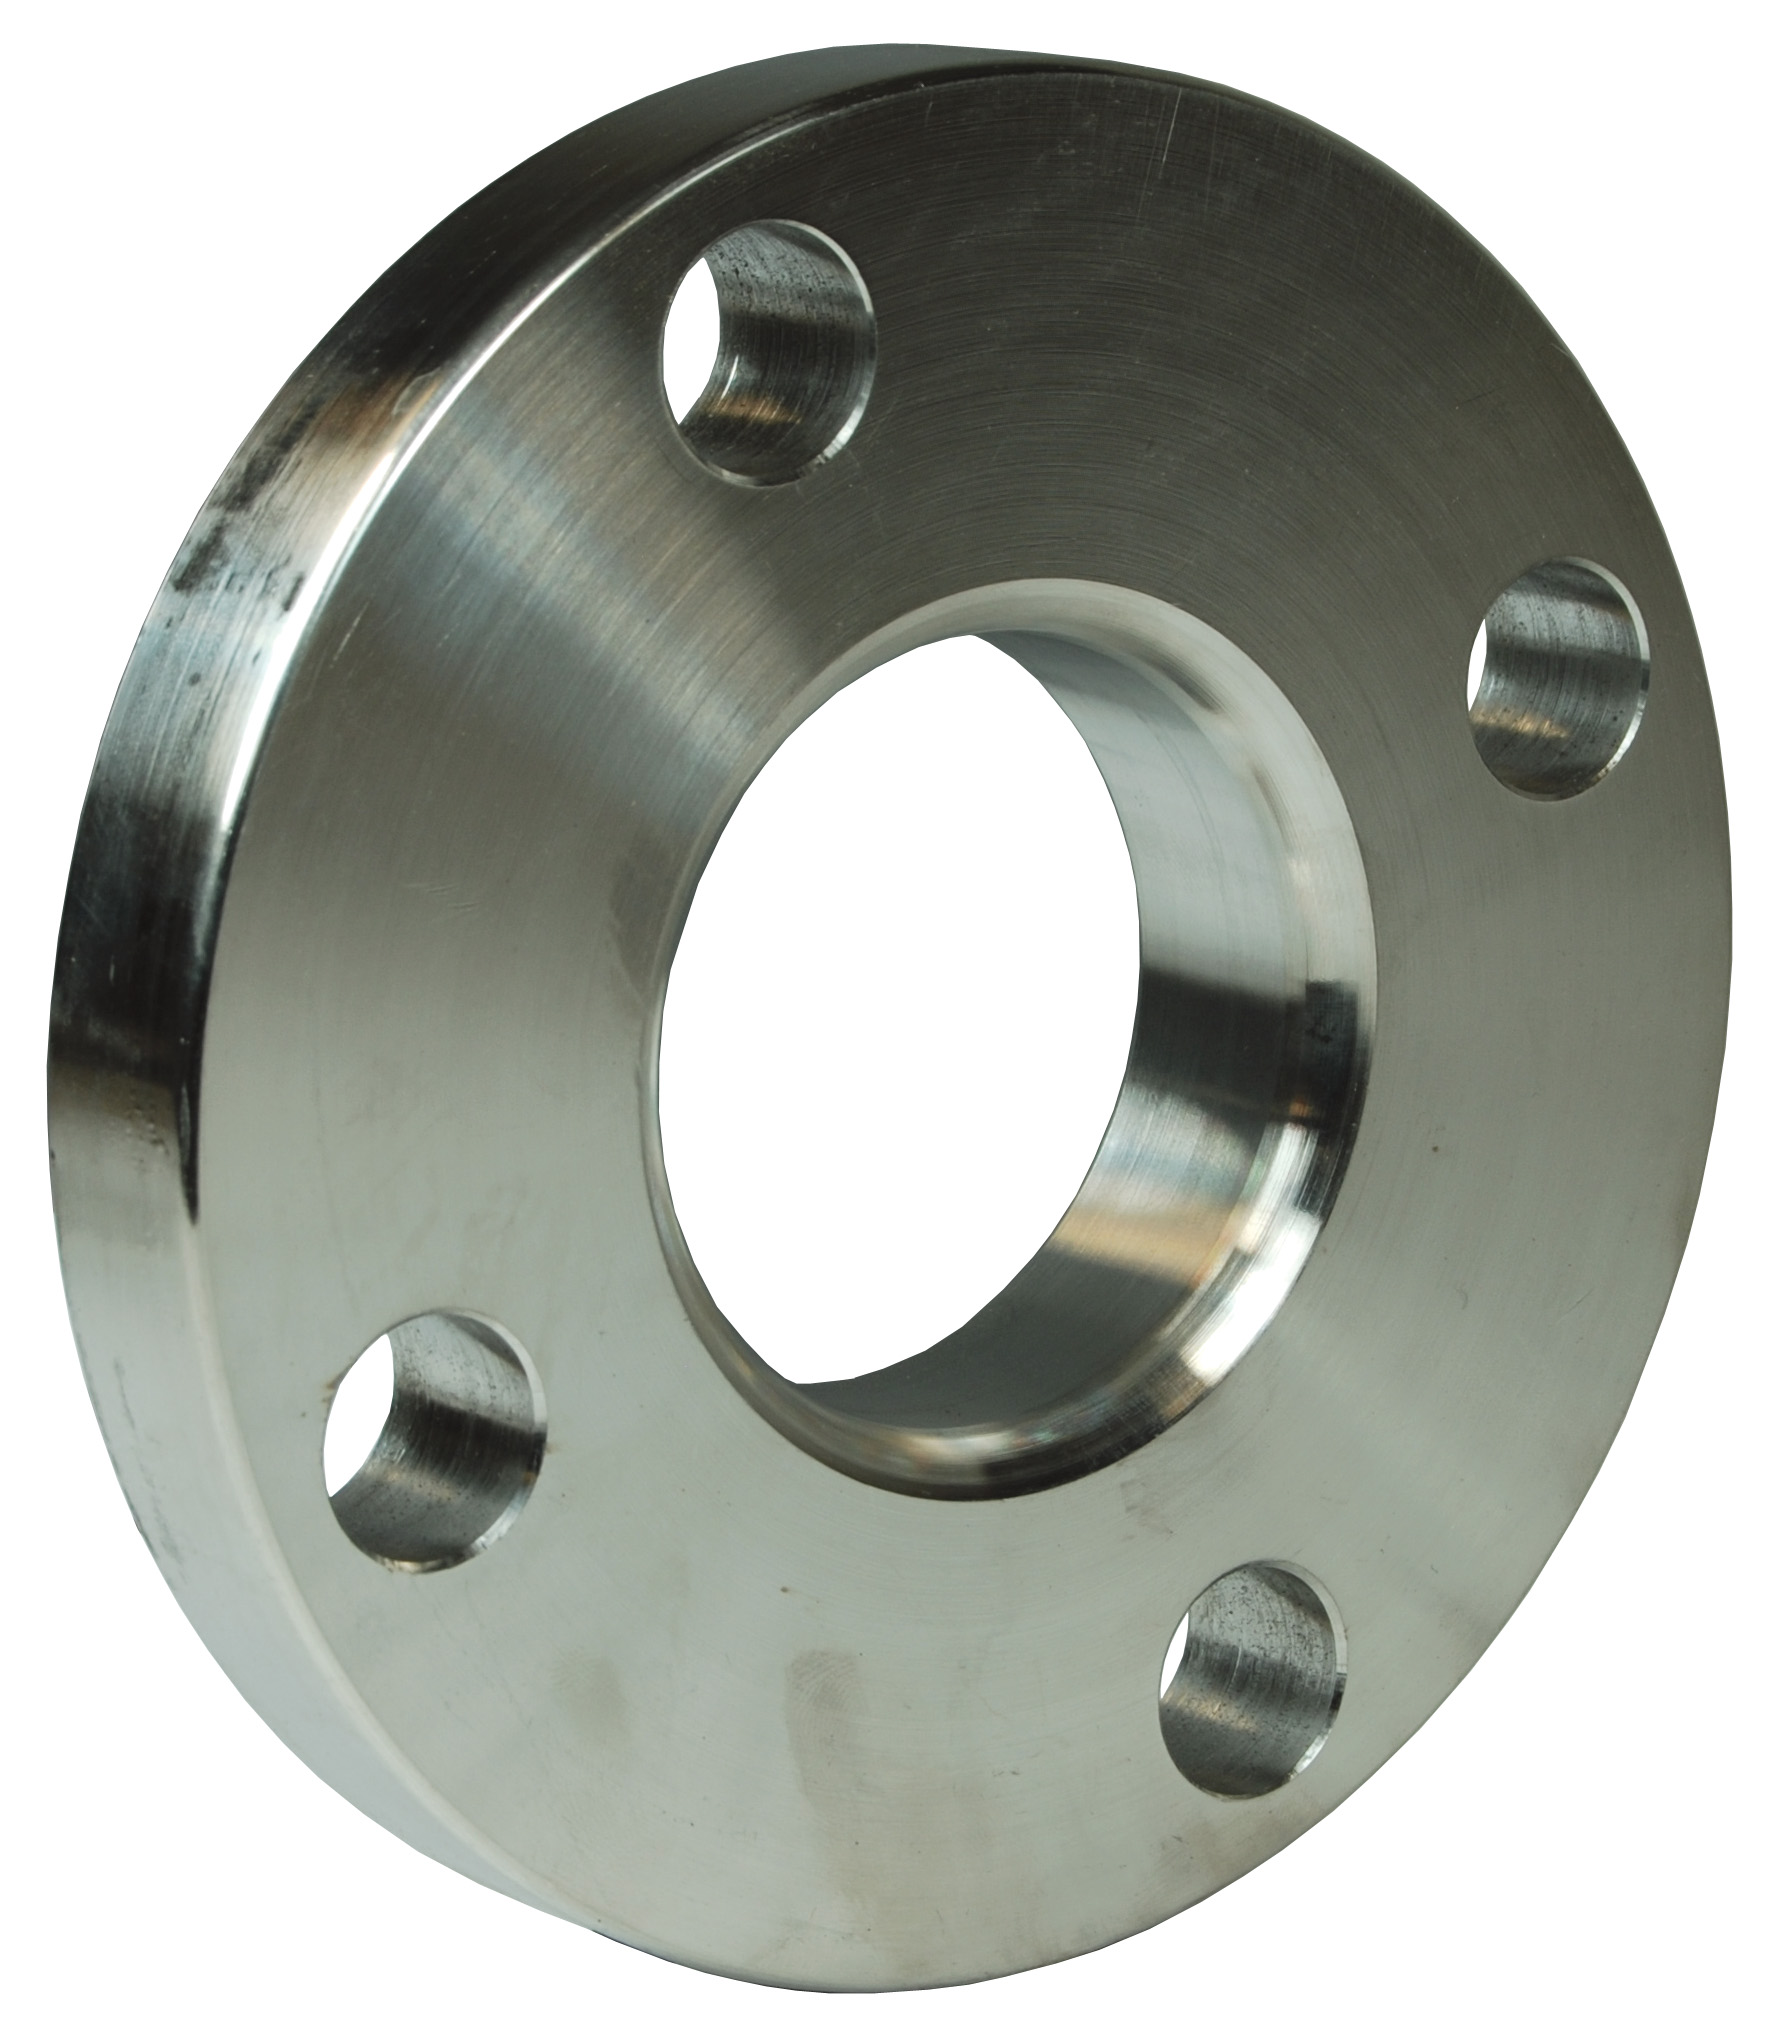 150 LB. ASA FORGED LAP JOINT FLOATING FLANGE